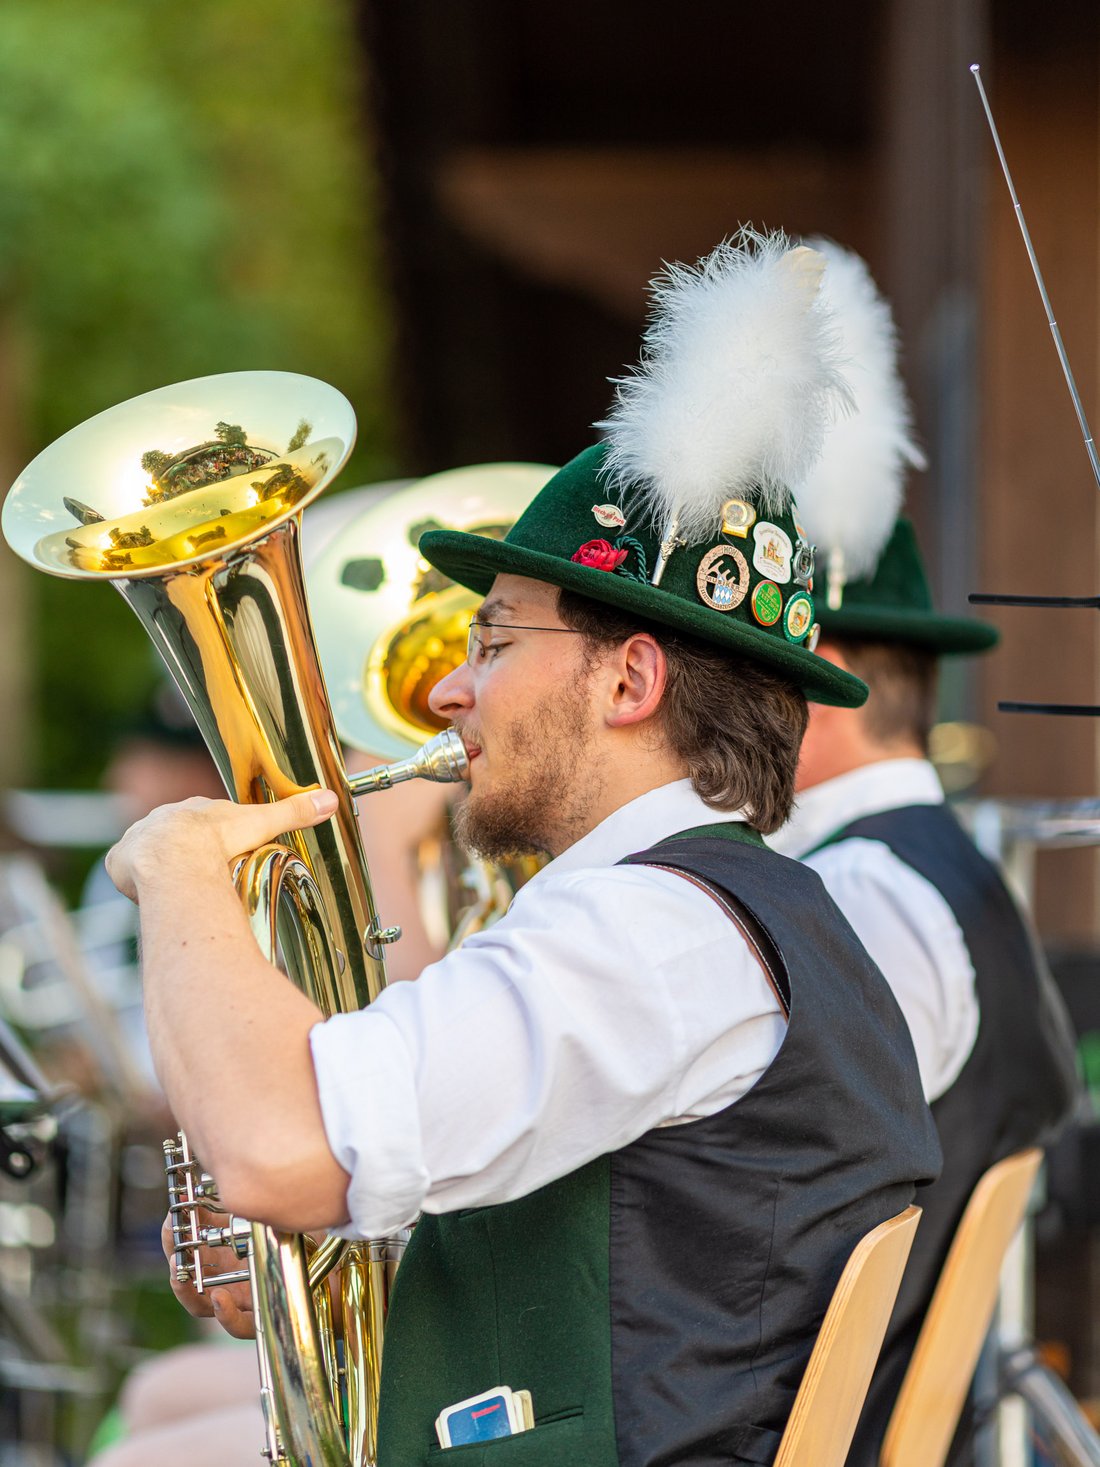 Musician with traditional Bavarian costume plays the baritone